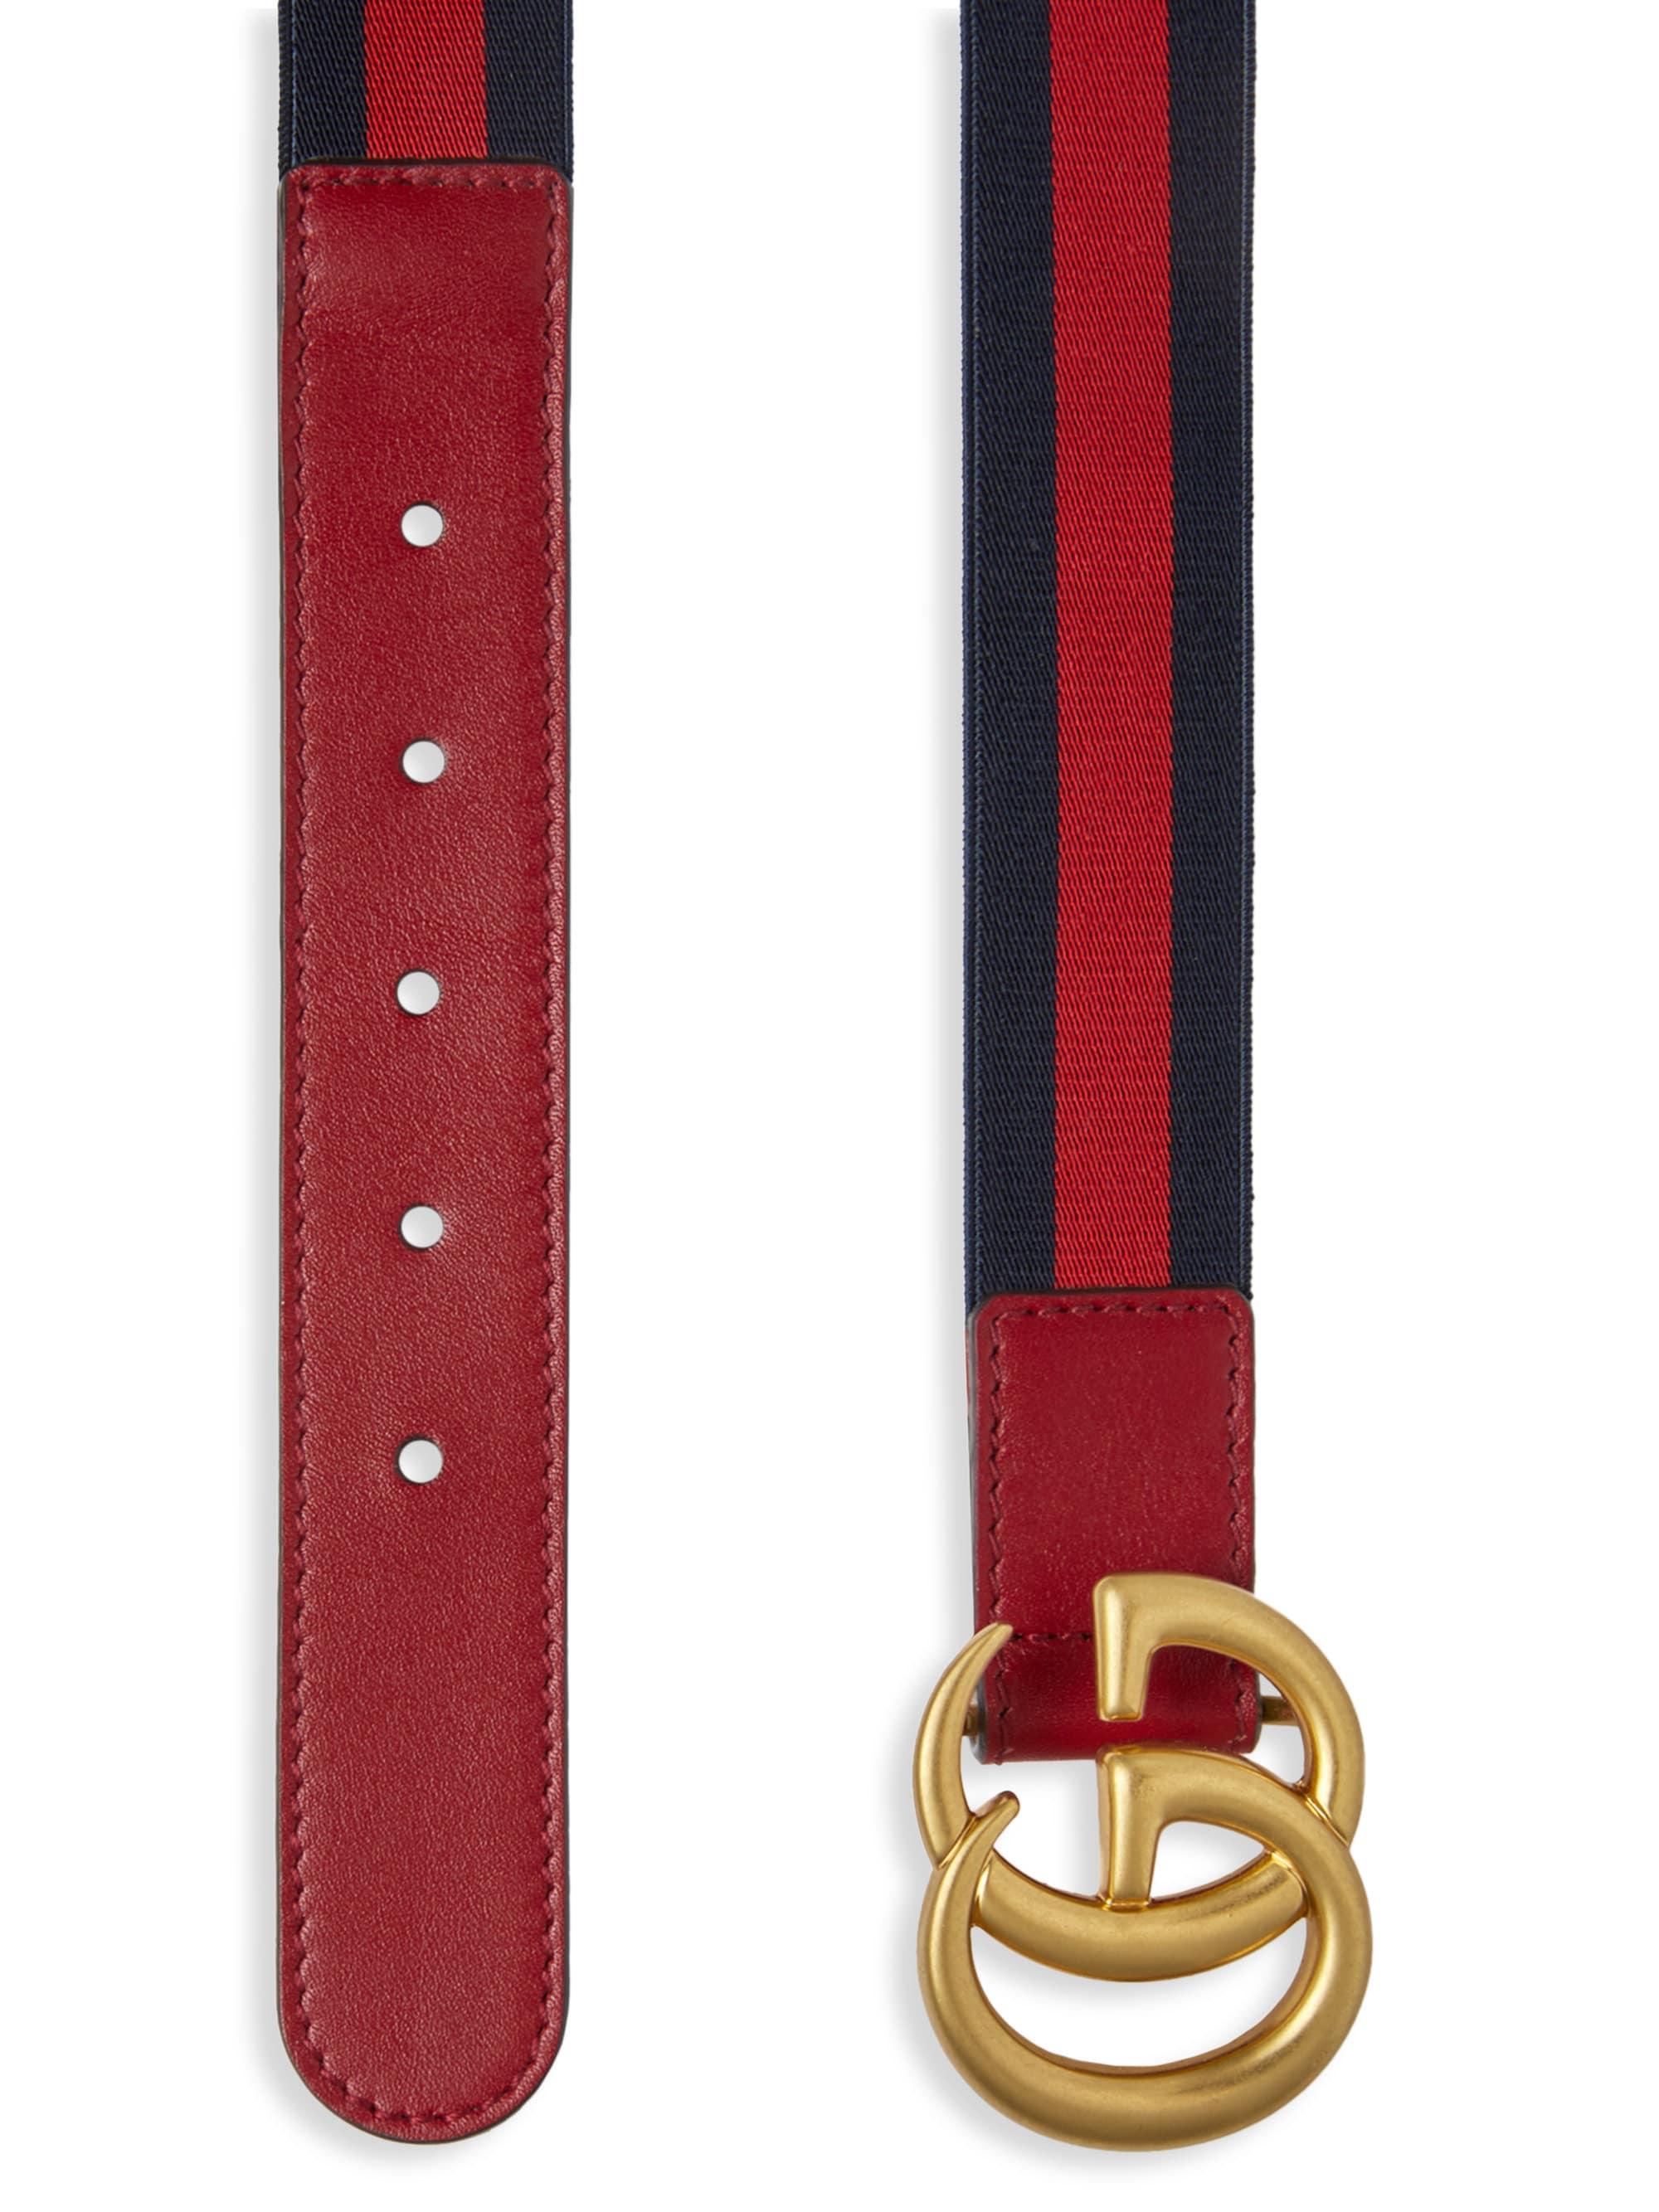 Gucci Leather Kid's Elastic Web Belt W/ Double G Buckle in Cherry Red (Red) -